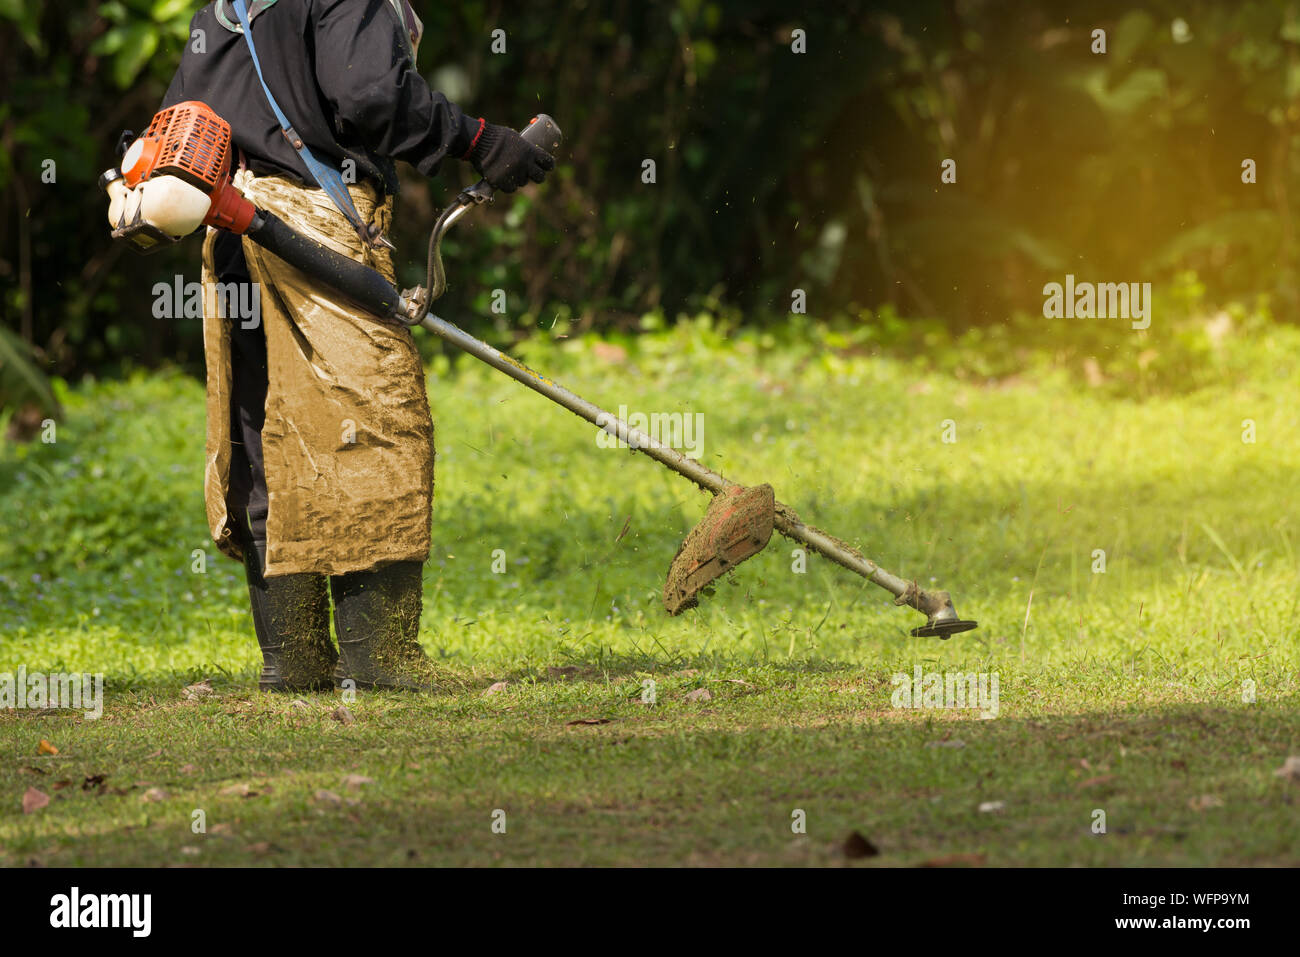 Low Section Of Man Mowing Grass Stock Photo